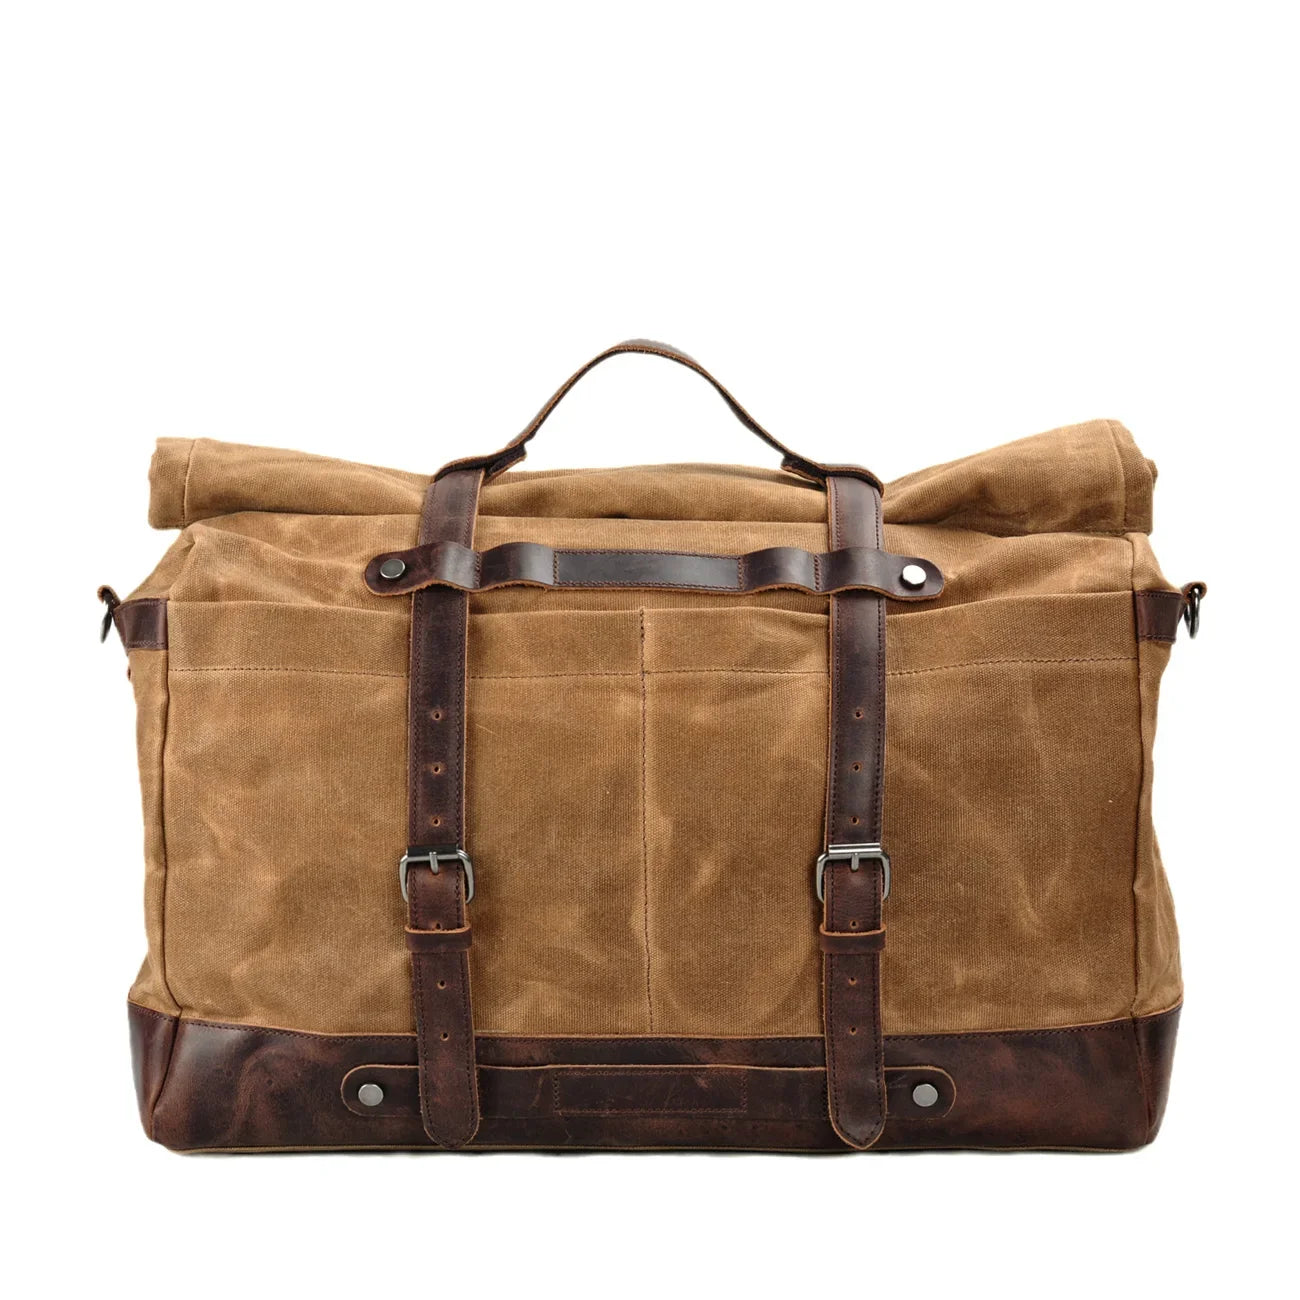 American Trail Waxed Canvas Large Capacity Rugged Explorer Travel Bag